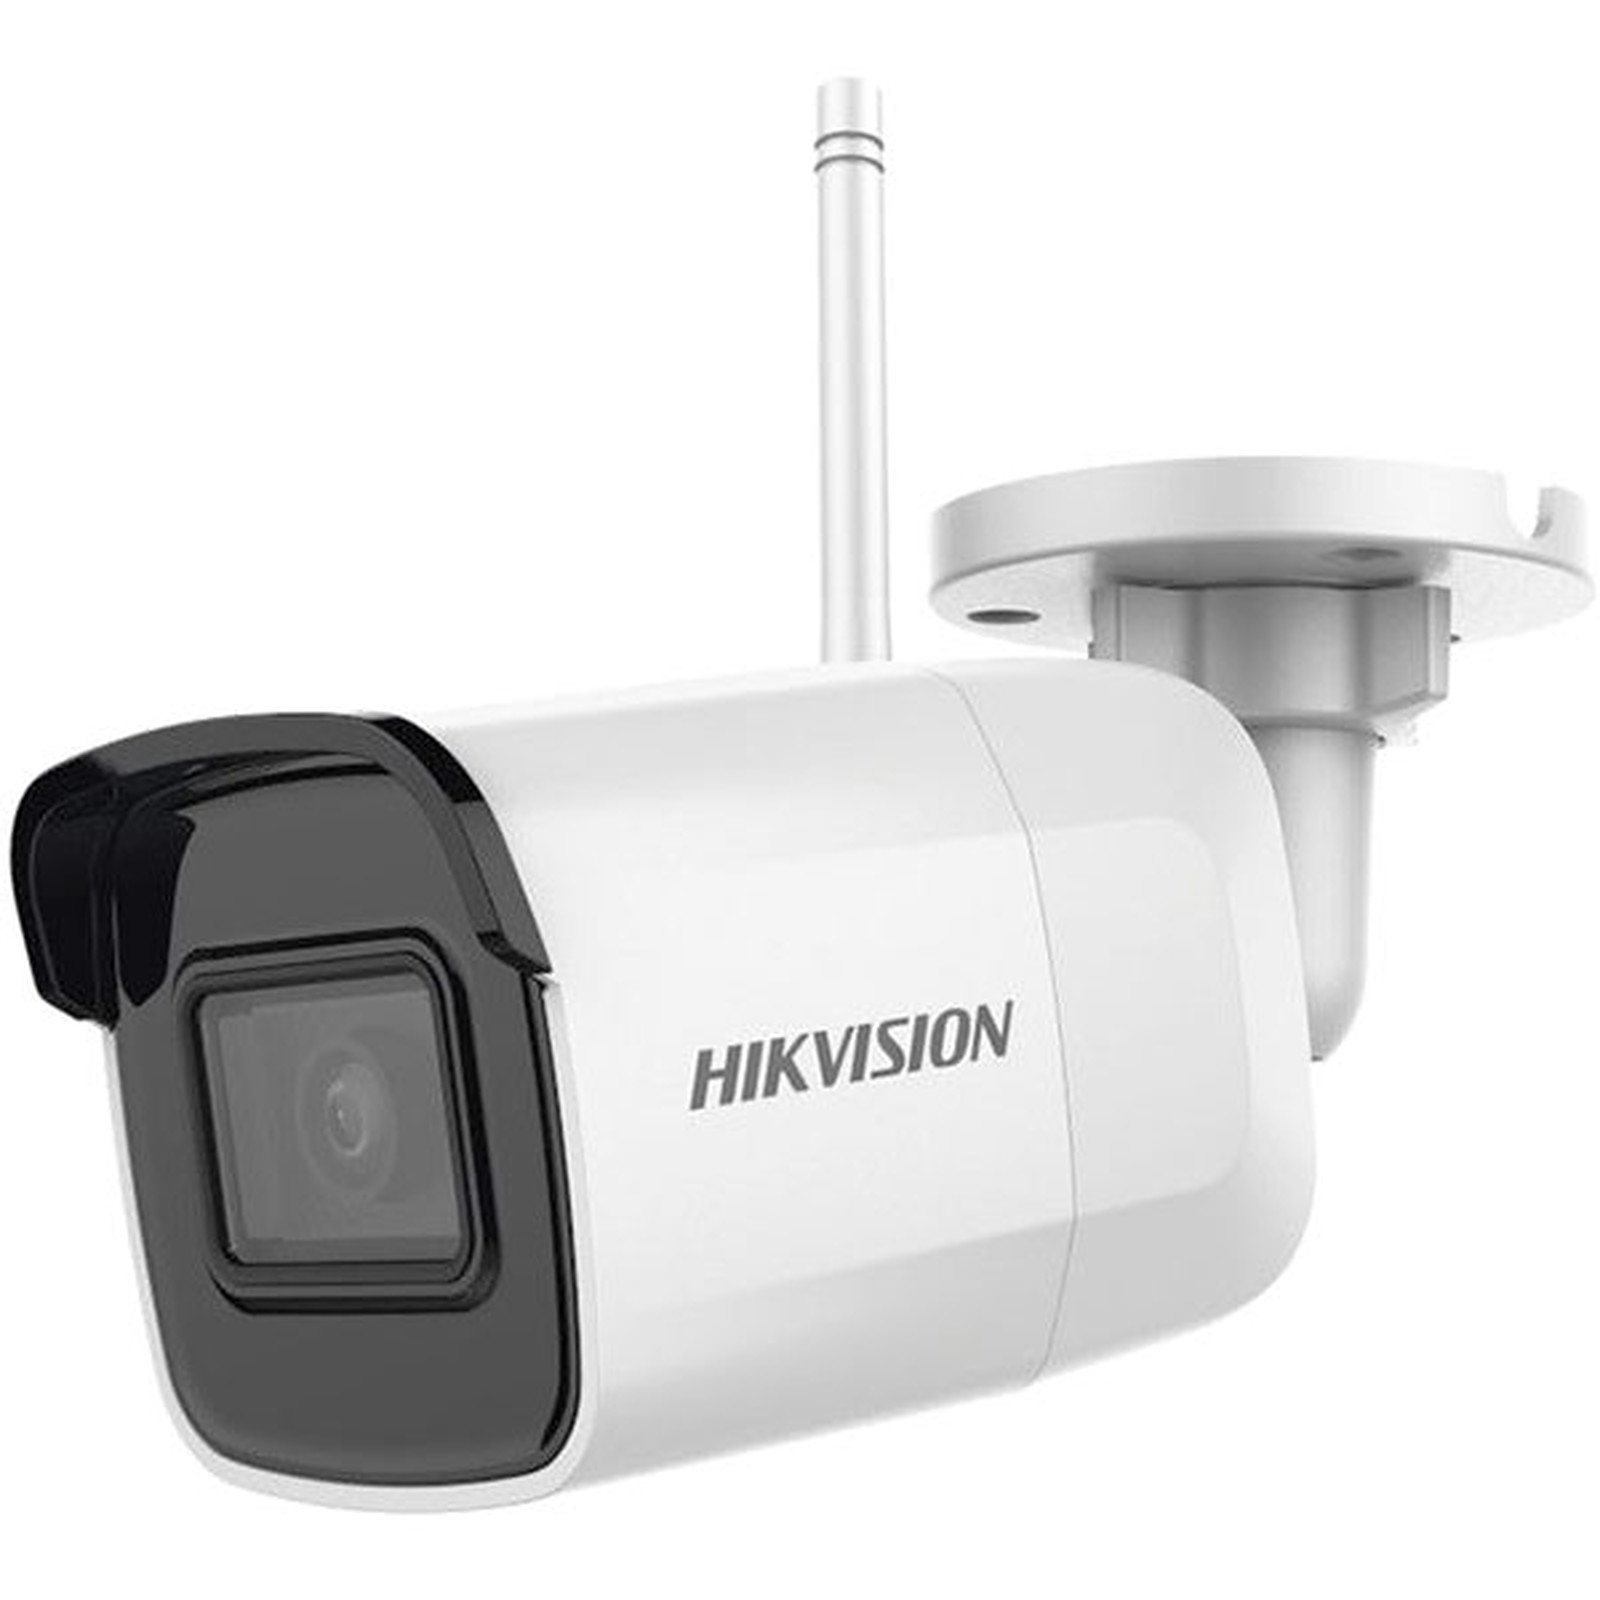 Hikvision DS-2CD2041G1-IDW1 · Occasion - Camera IP Hikvision - Occasion